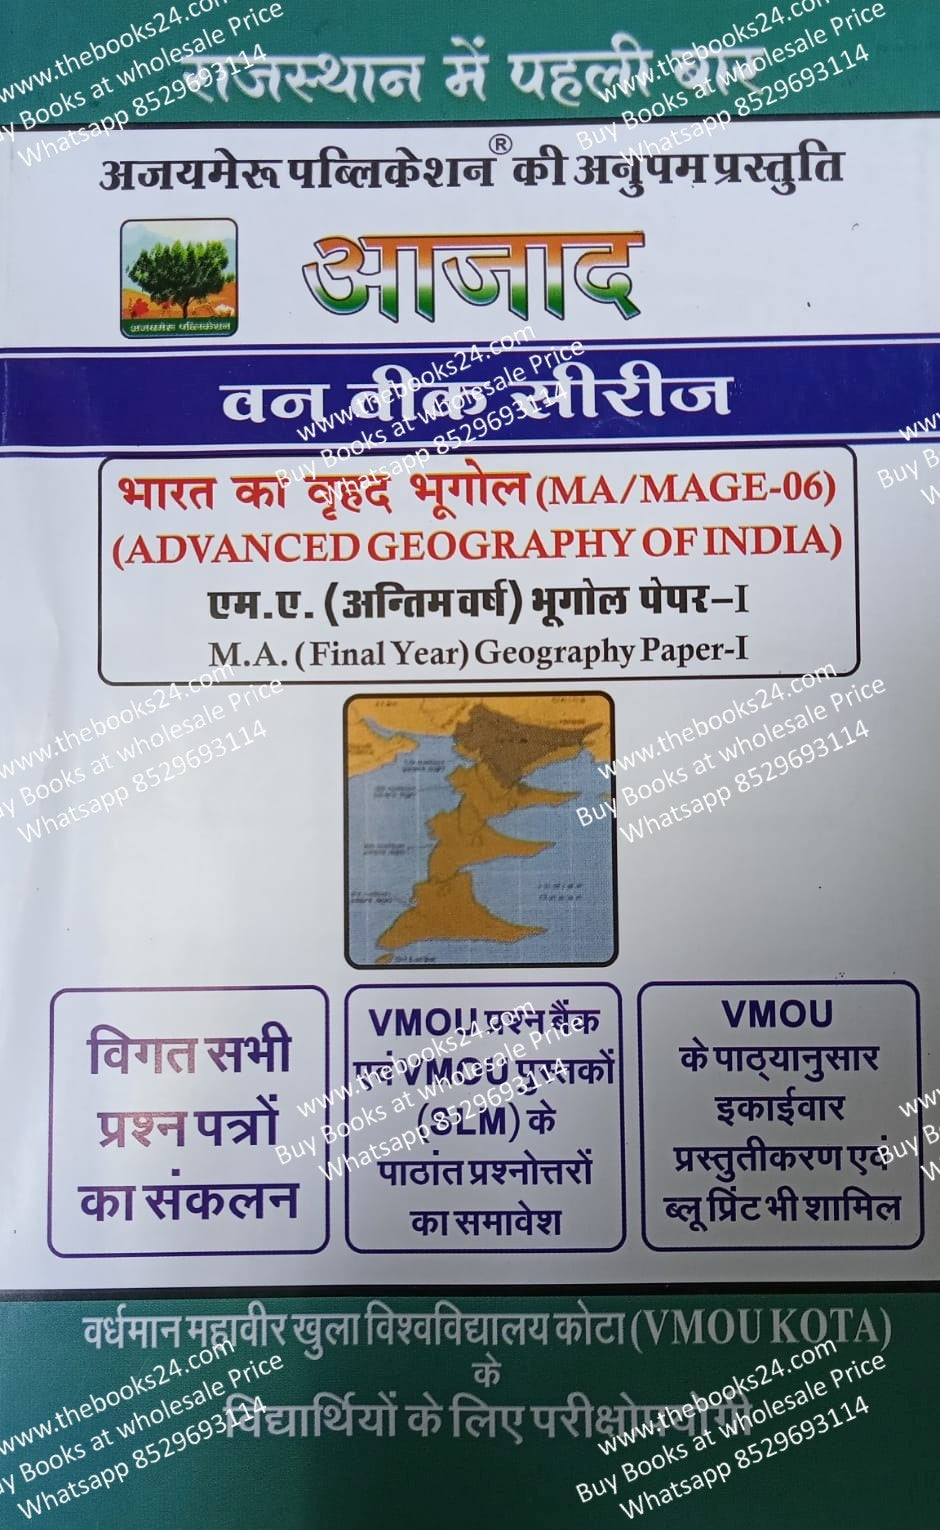 Azad VMOU Kota M.A (Final year) Geography Paper-I Advanced Geography Of India (MA/MAGE-06)